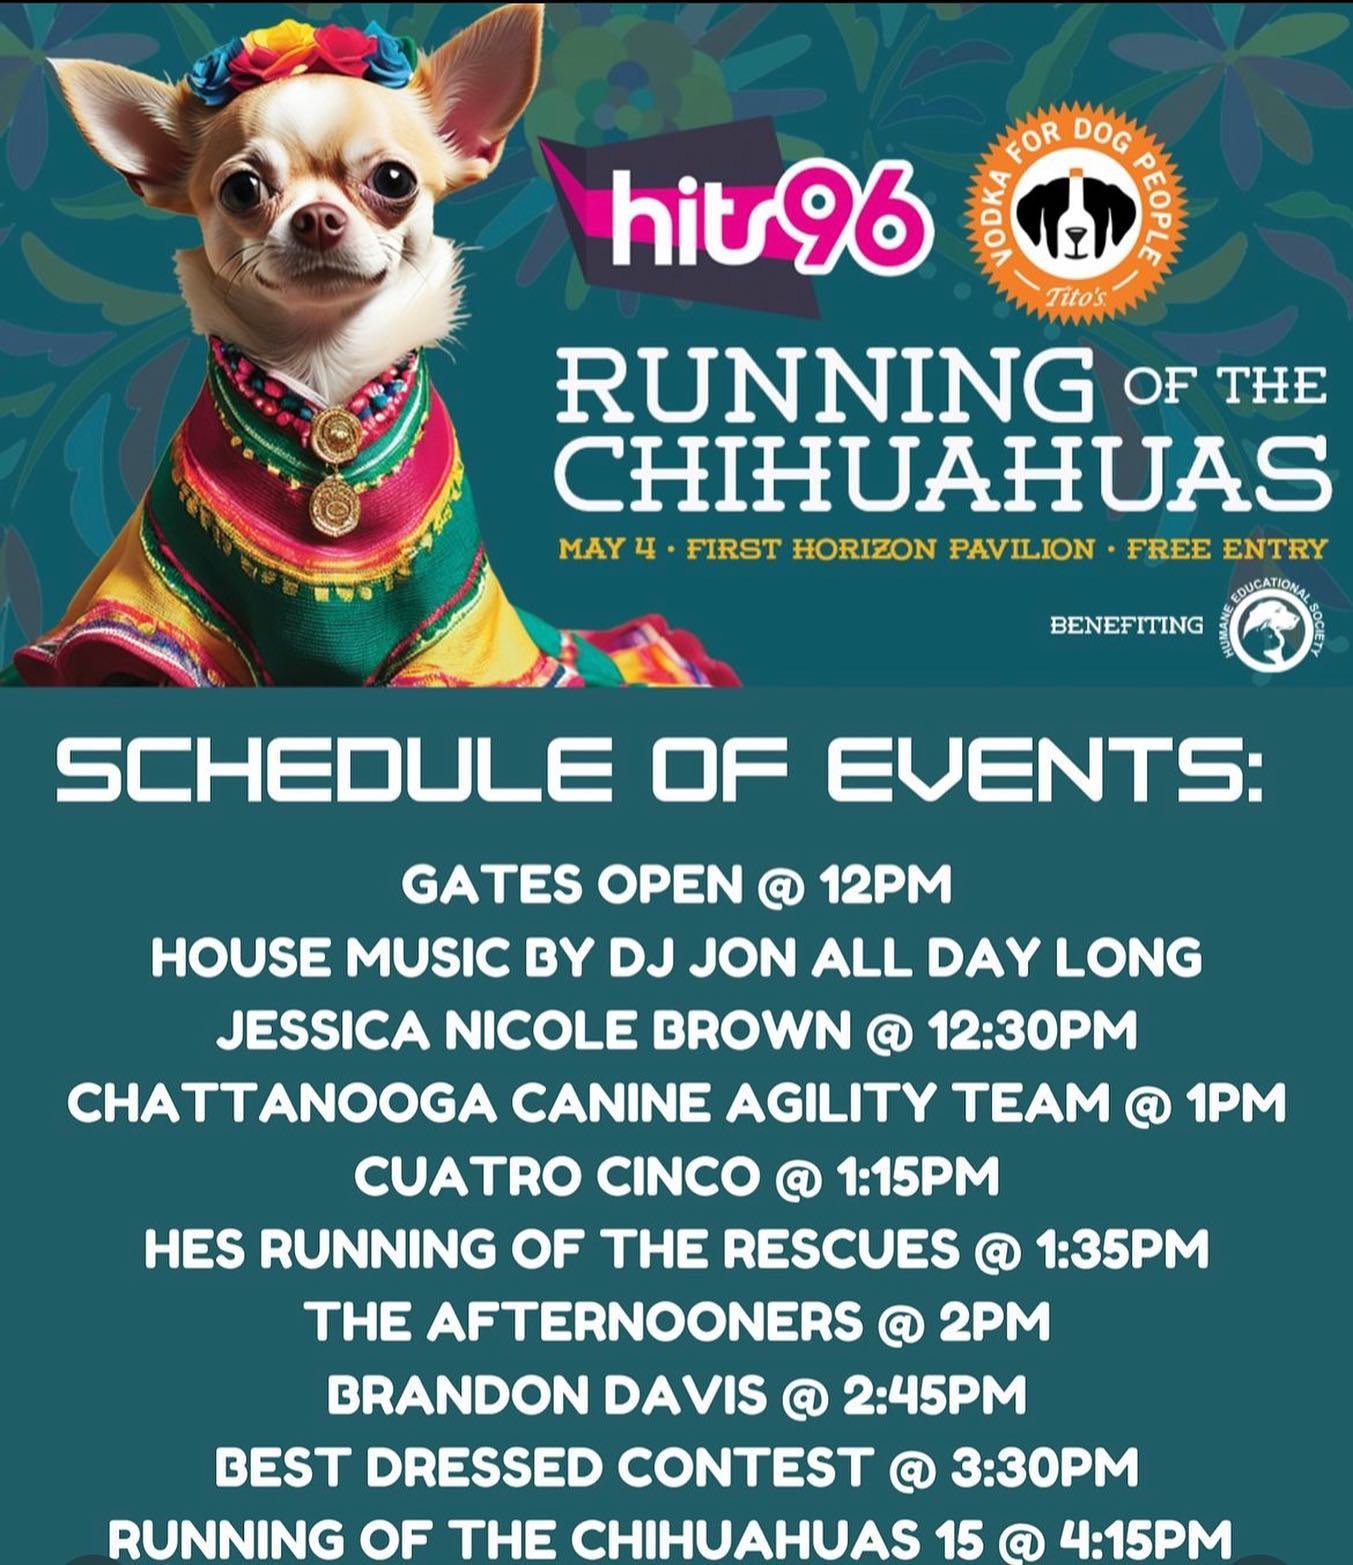 Let&rsquo;s get it! I&rsquo;m on at 12:30pm! 🐕🎫 
&bull;
&bull;
&bull;
#hits96 #runningofthechihuahuas #chihuahua #cincodemayo #chattanoogafun